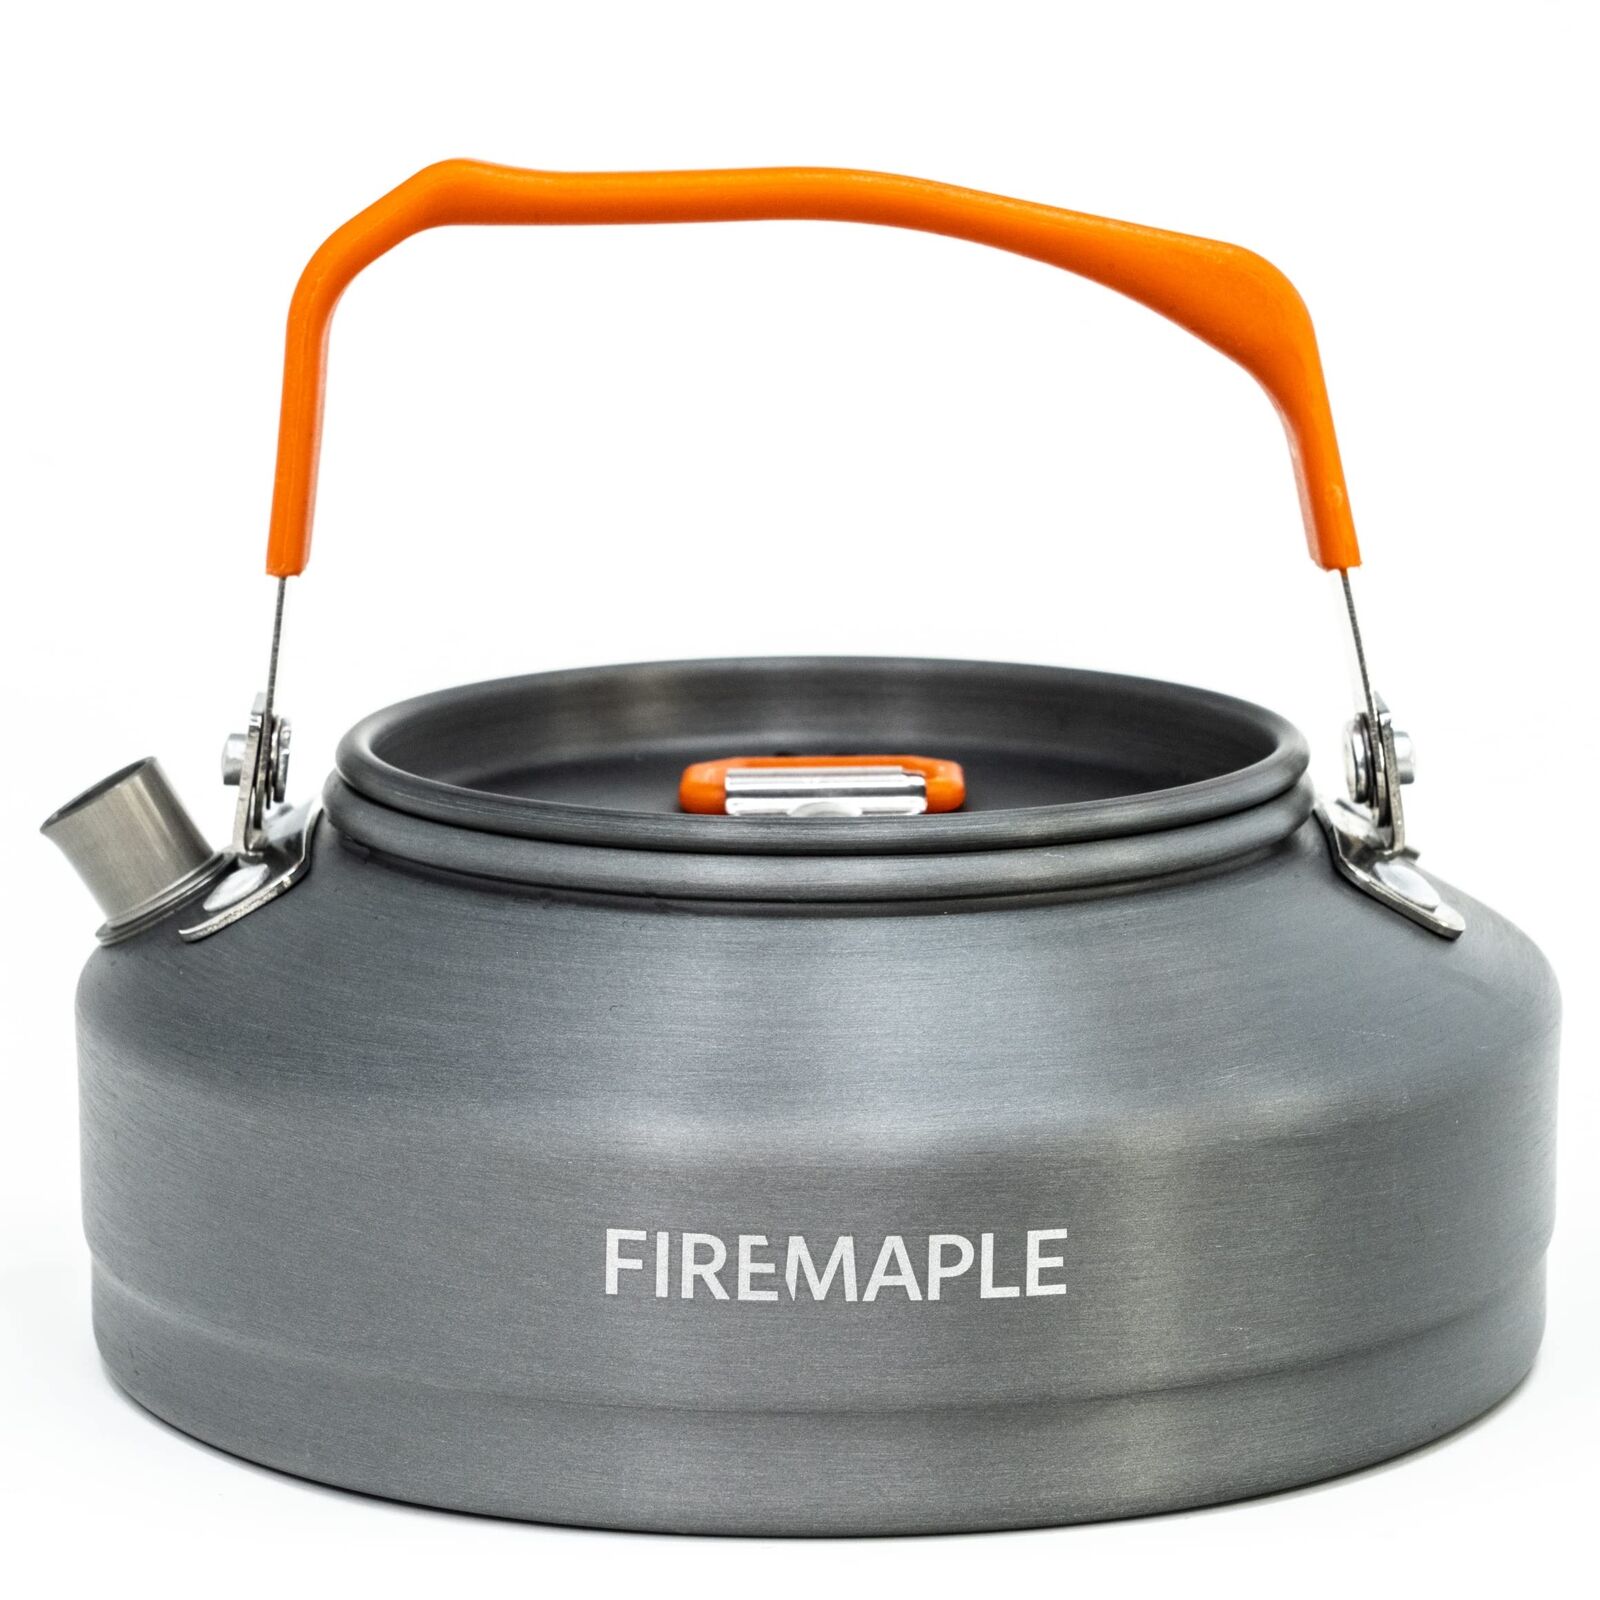 Fire-Maple Aluminum Outdoor Kettle Camping Compact 0.68Pound gray